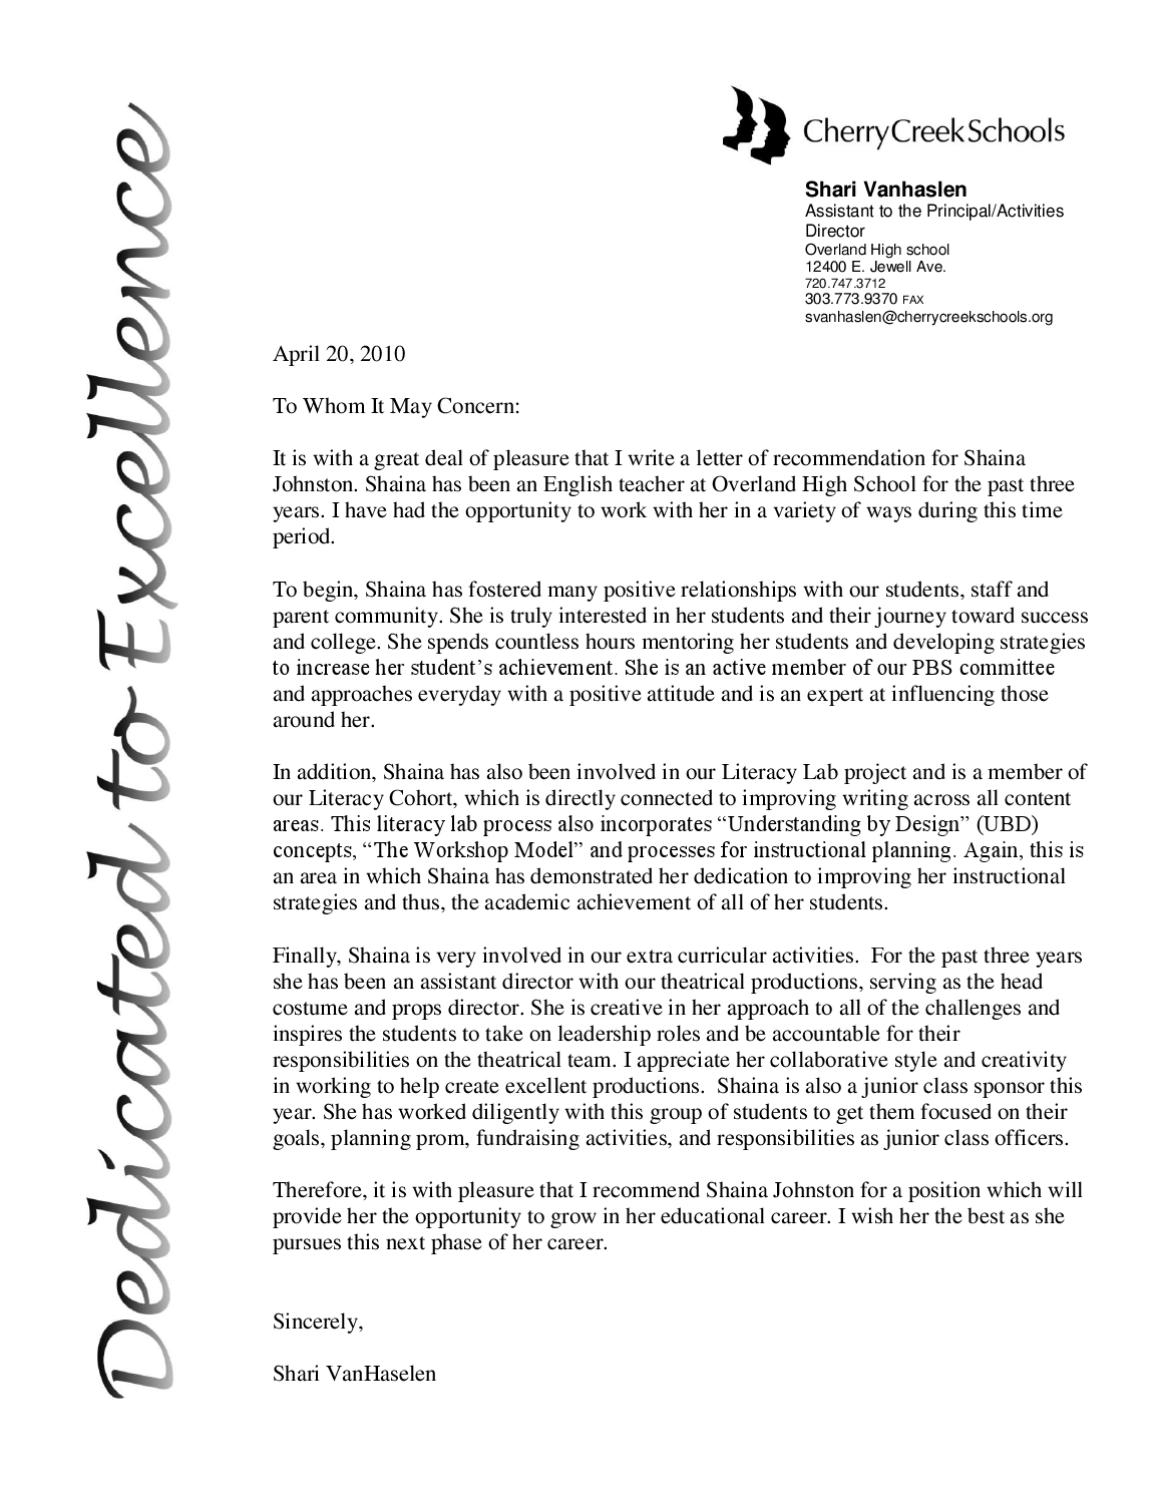 Principal Letter Of Recommendation For Student Debandje intended for sizing 1159 X 1500